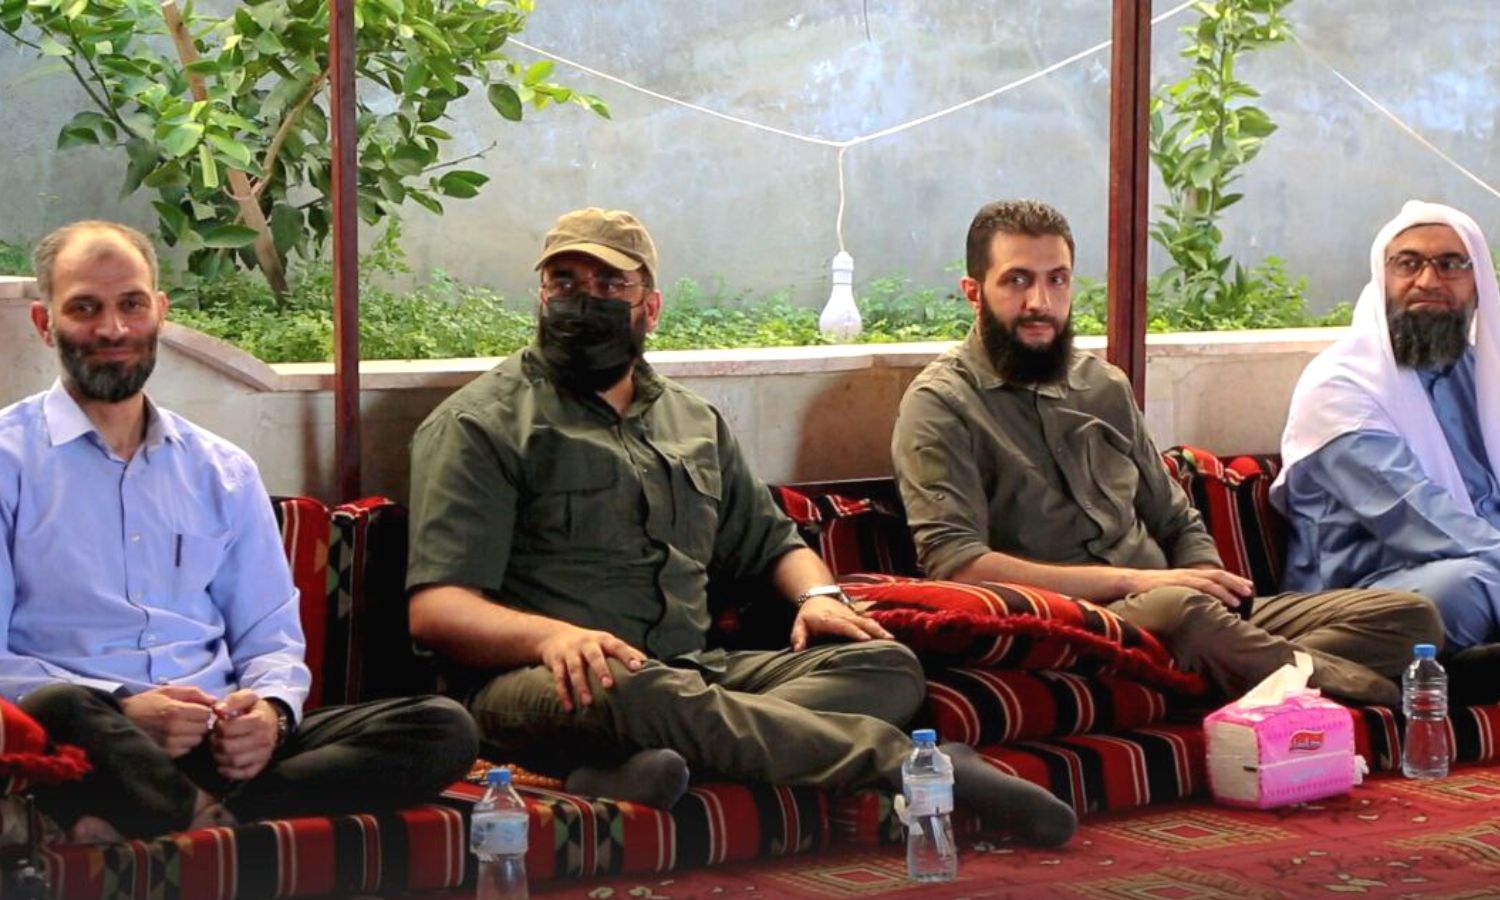 From the right, the leader in Tahrir al-Sham, Mazhar al-Wais, the commander of Tahrir al-Sham, Abu Mohammad al-Jolani, the leader Abu Maria al-Qahtani, and the Sharia official Abdul Rahim Atoun in a meeting with notables of the eastern region - July 14, 2022 (Amjad)